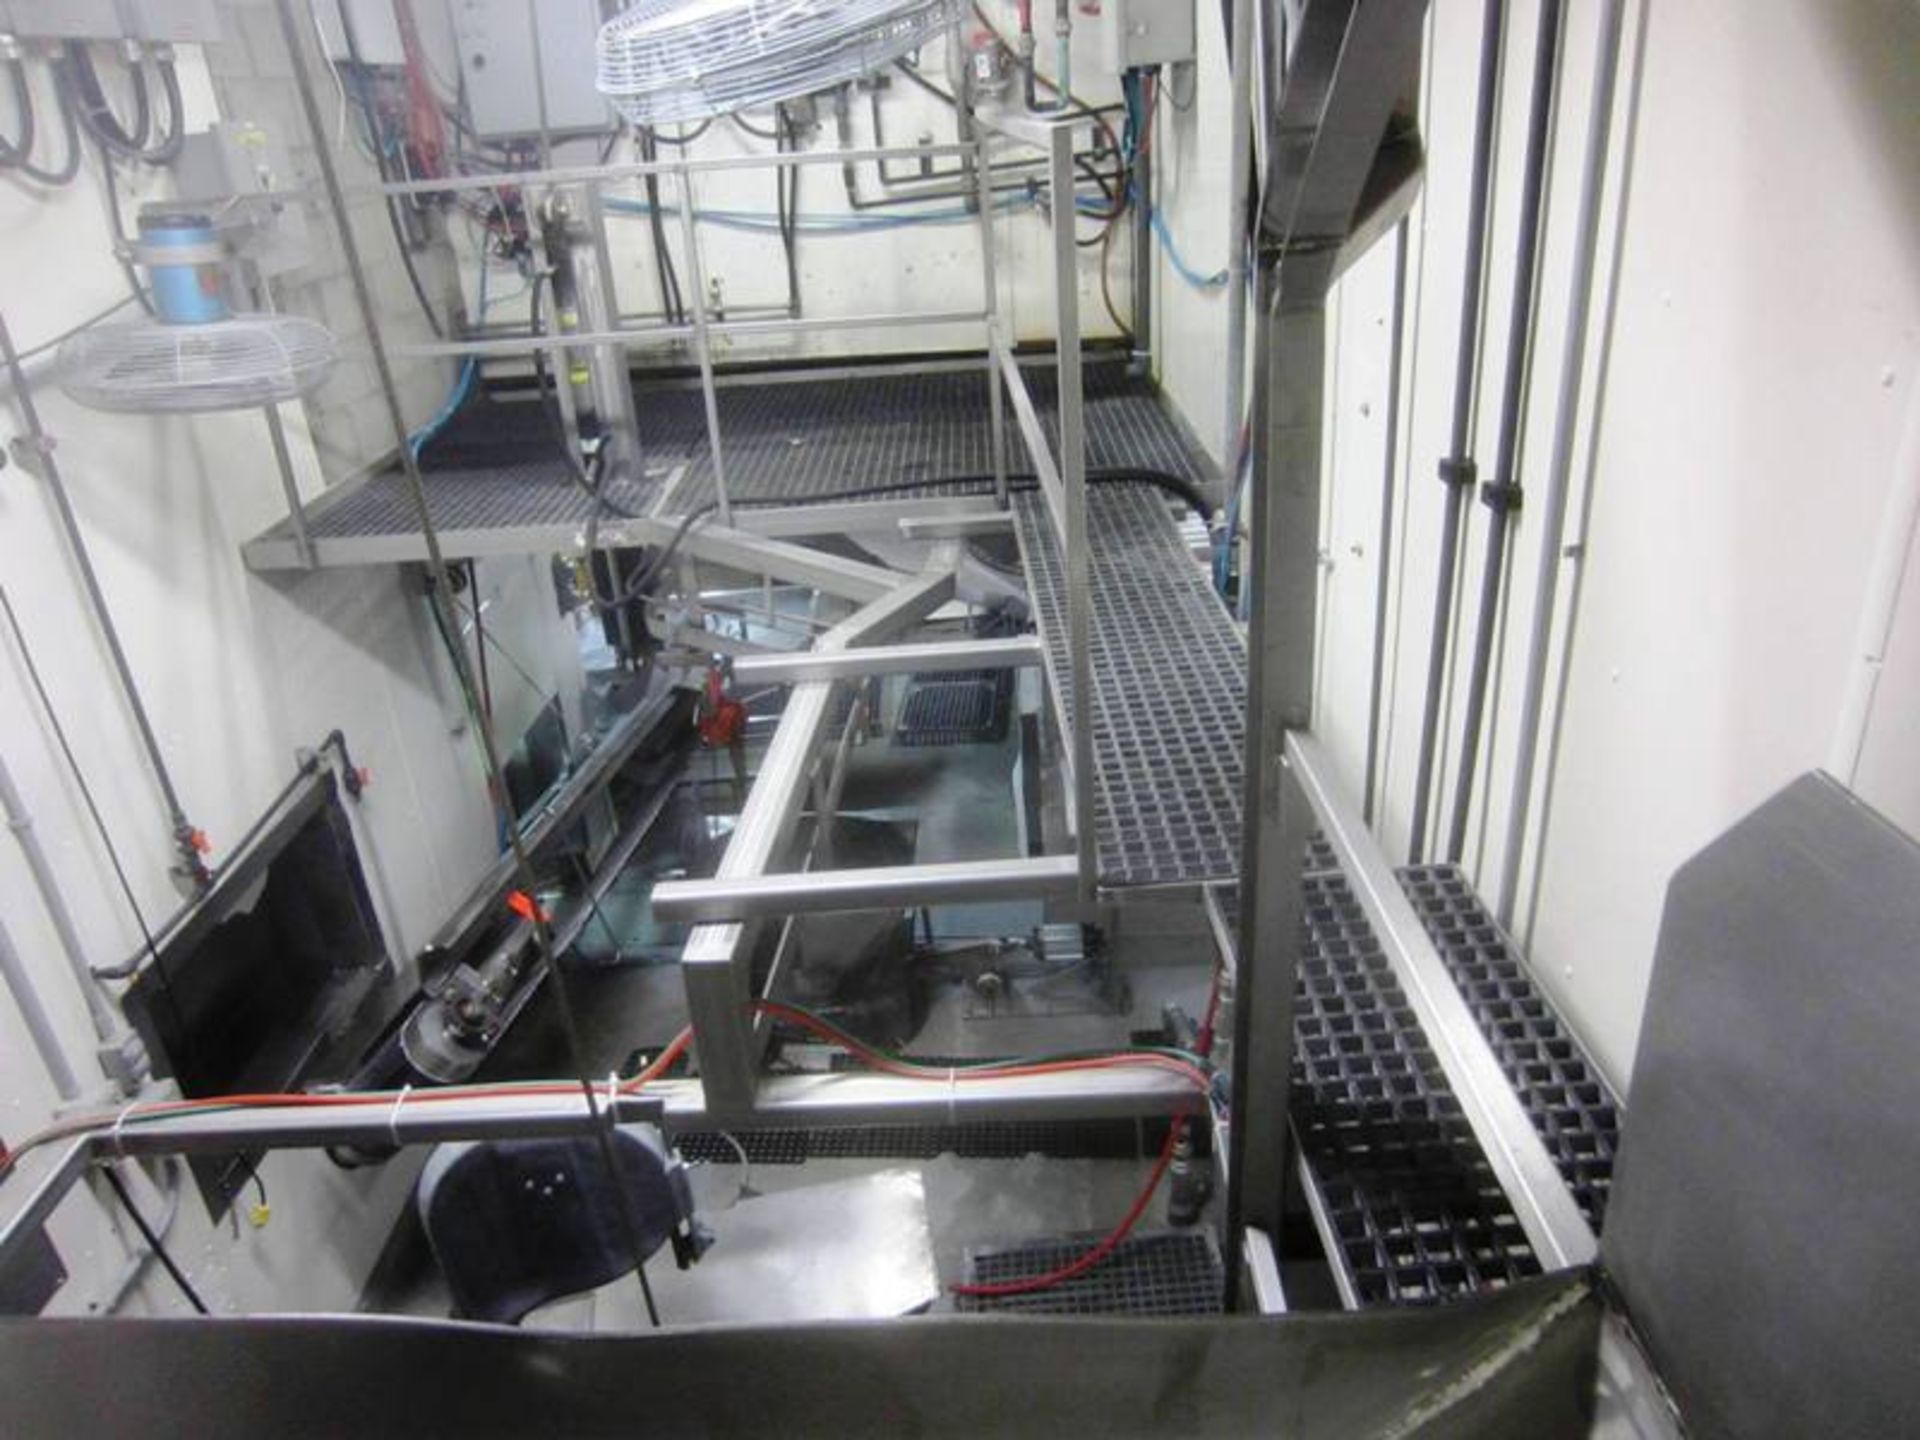 TecFood Mdl. V20 S.S. Stomach Washer with s.s. loader 3' W X 5' L, complete with rail, overhead work - Image 5 of 8